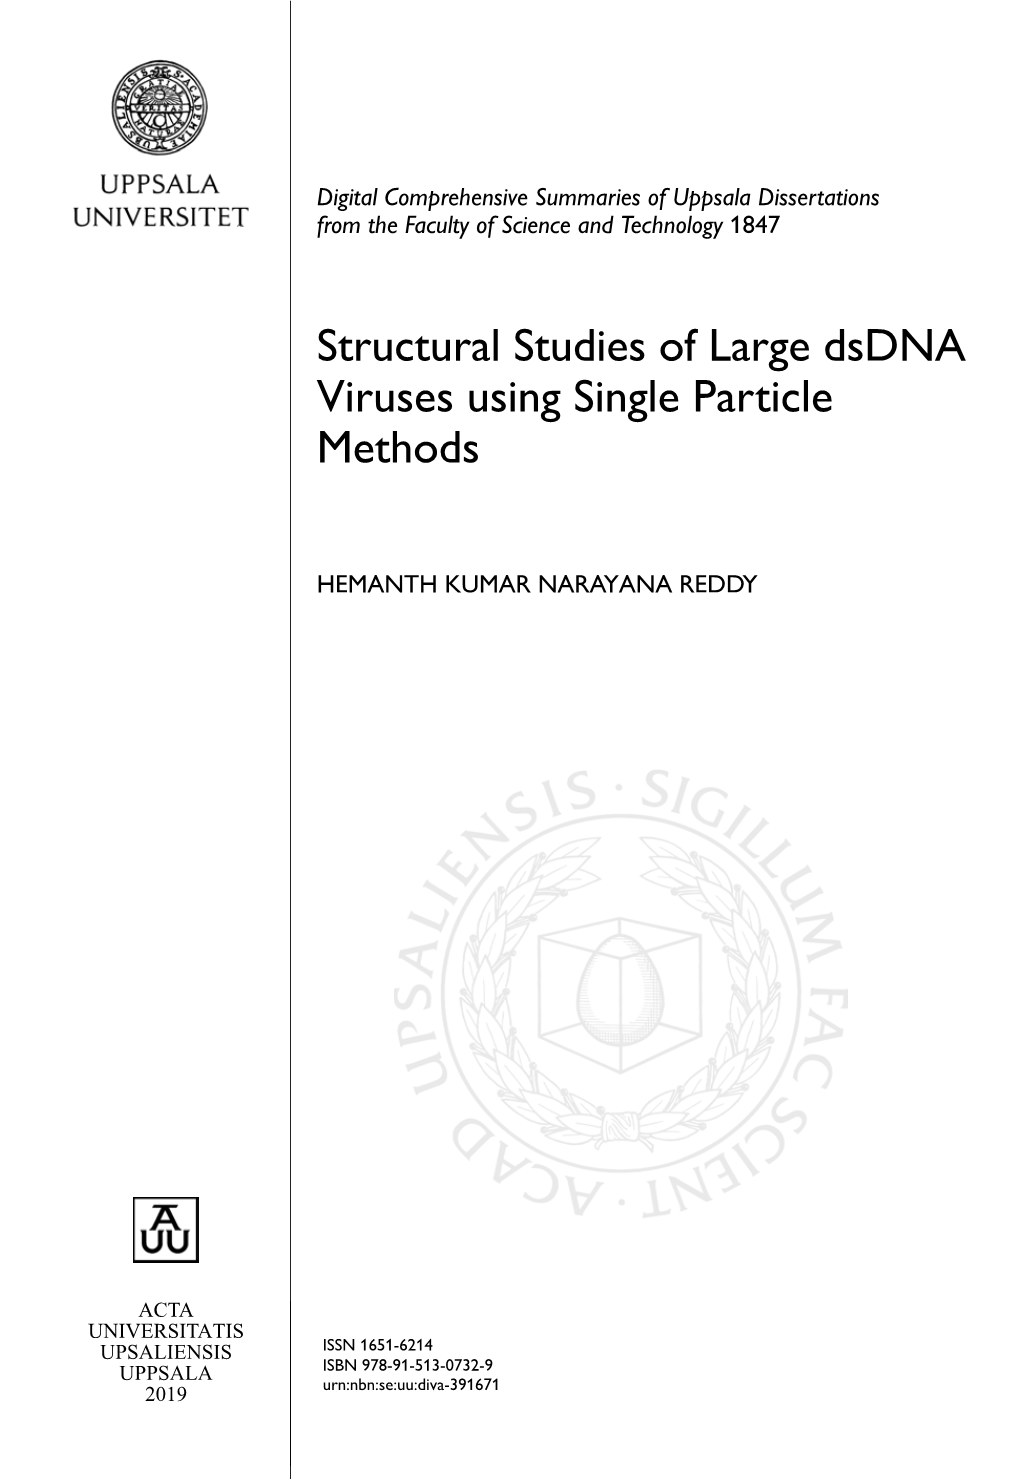 Structural Studies of Large Dsdna Viruses Using Single Particle Methods